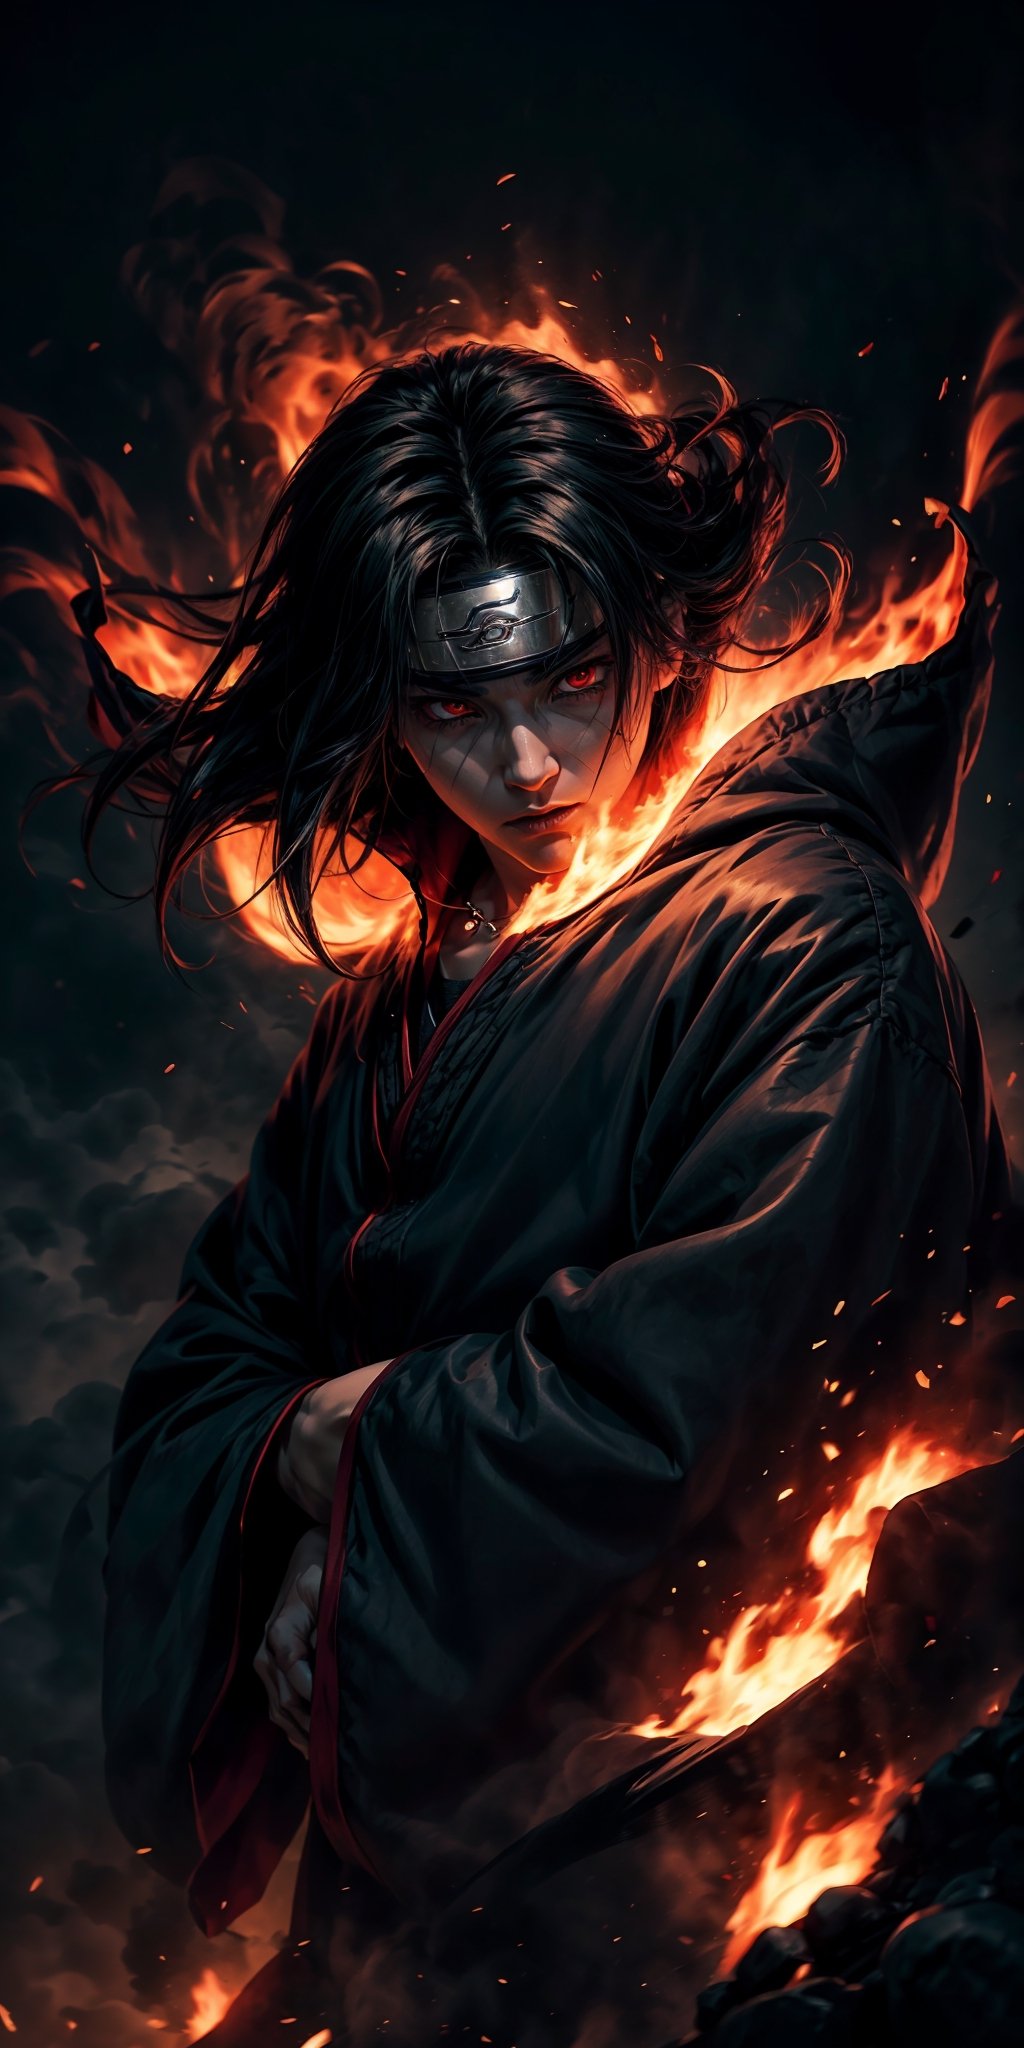 Visualize the legendary Itachi Uchiha, a prominent character from the Naruto anime. full body, muscular physique, reflecting his formidable strength.

Itachi Uchiha is clad in his signature ninja attire. His defining ability is his mastery over fire, black flames, showcasing his power to manipulate fire at will. Set to backdrop of black crows flying in distance and sitting on his shoulder

Set him against a background of raging fire, with black flames dancing in the backdrop, creating an inferno-like atmosphere. The flames should emphasize his fiery abilities and his unwavering resolve.

Capture this image to pay homage to Itachi Uchiha's character, showcasing his powerful presence and his association with the element of blackfire, a central theme in his story arc within the Naruto series." ((Perfect face)), ((perfect hands)), ((perfect body)), [perfect image of Itachi Uchiha (Naruto anime character)]